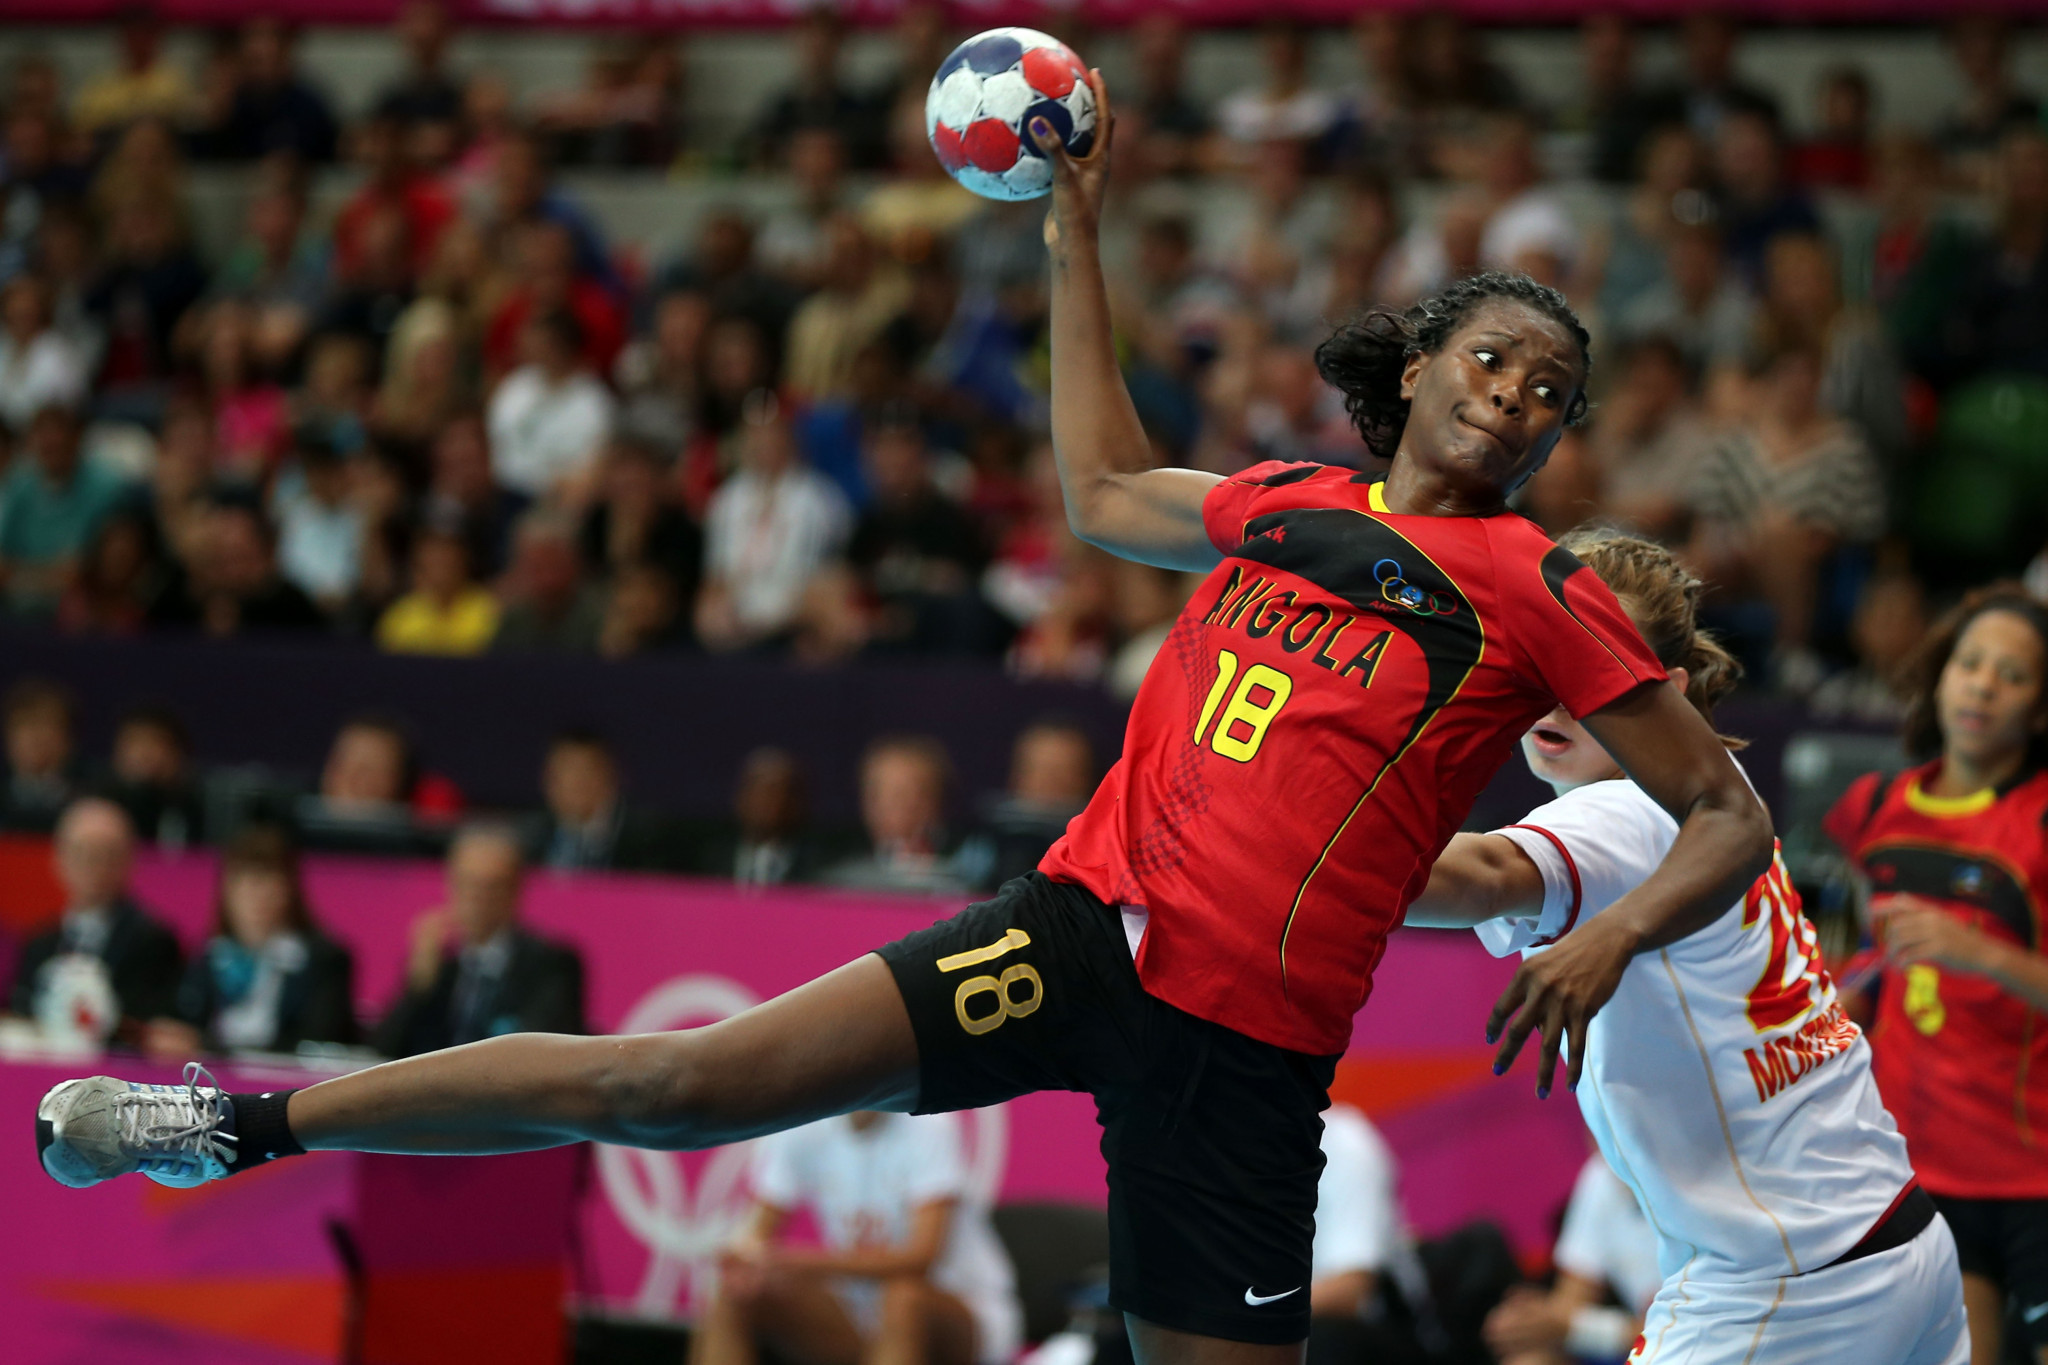 Angola will be defending their title at the African Women's Handball Championship now underway at Yaoundé in Cameroon ©Getty Images